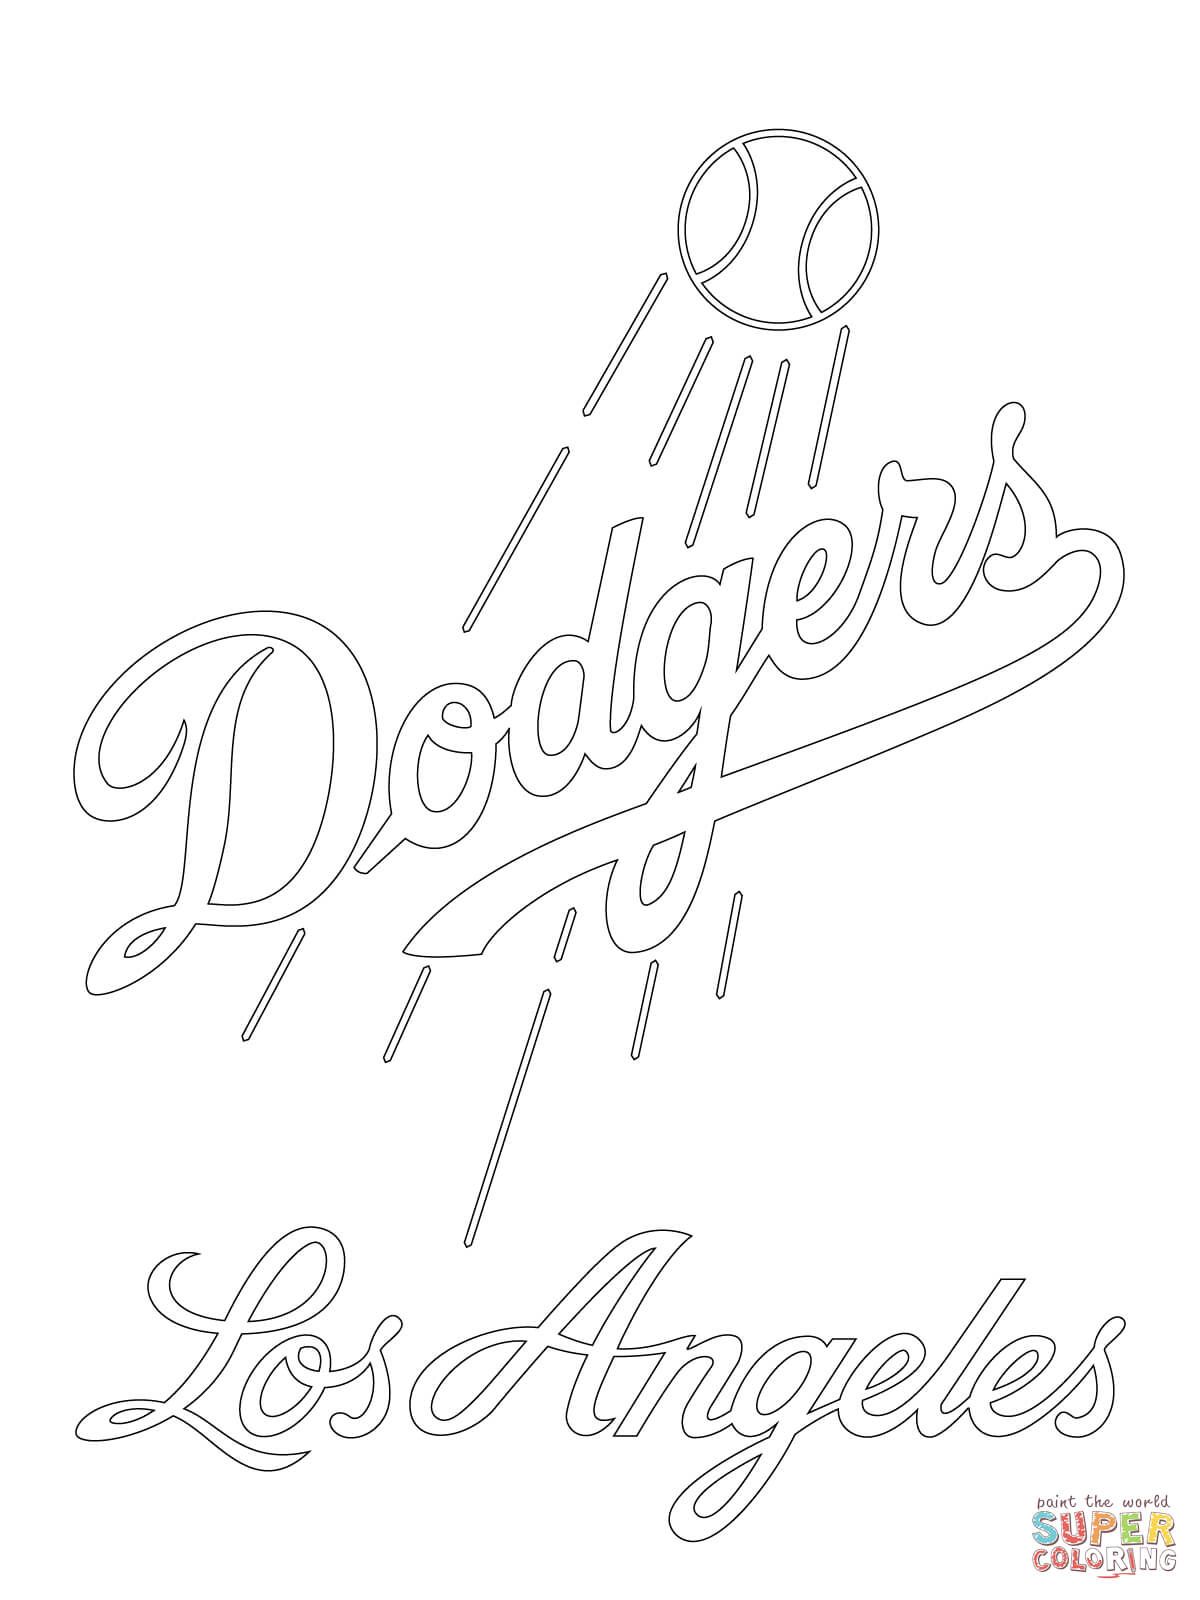 Los Angeles Dodgers Logo coloring page | Free Printable Coloring Pages |  Baseball coloring pages, Los angeles dodgers logo, Dodgers